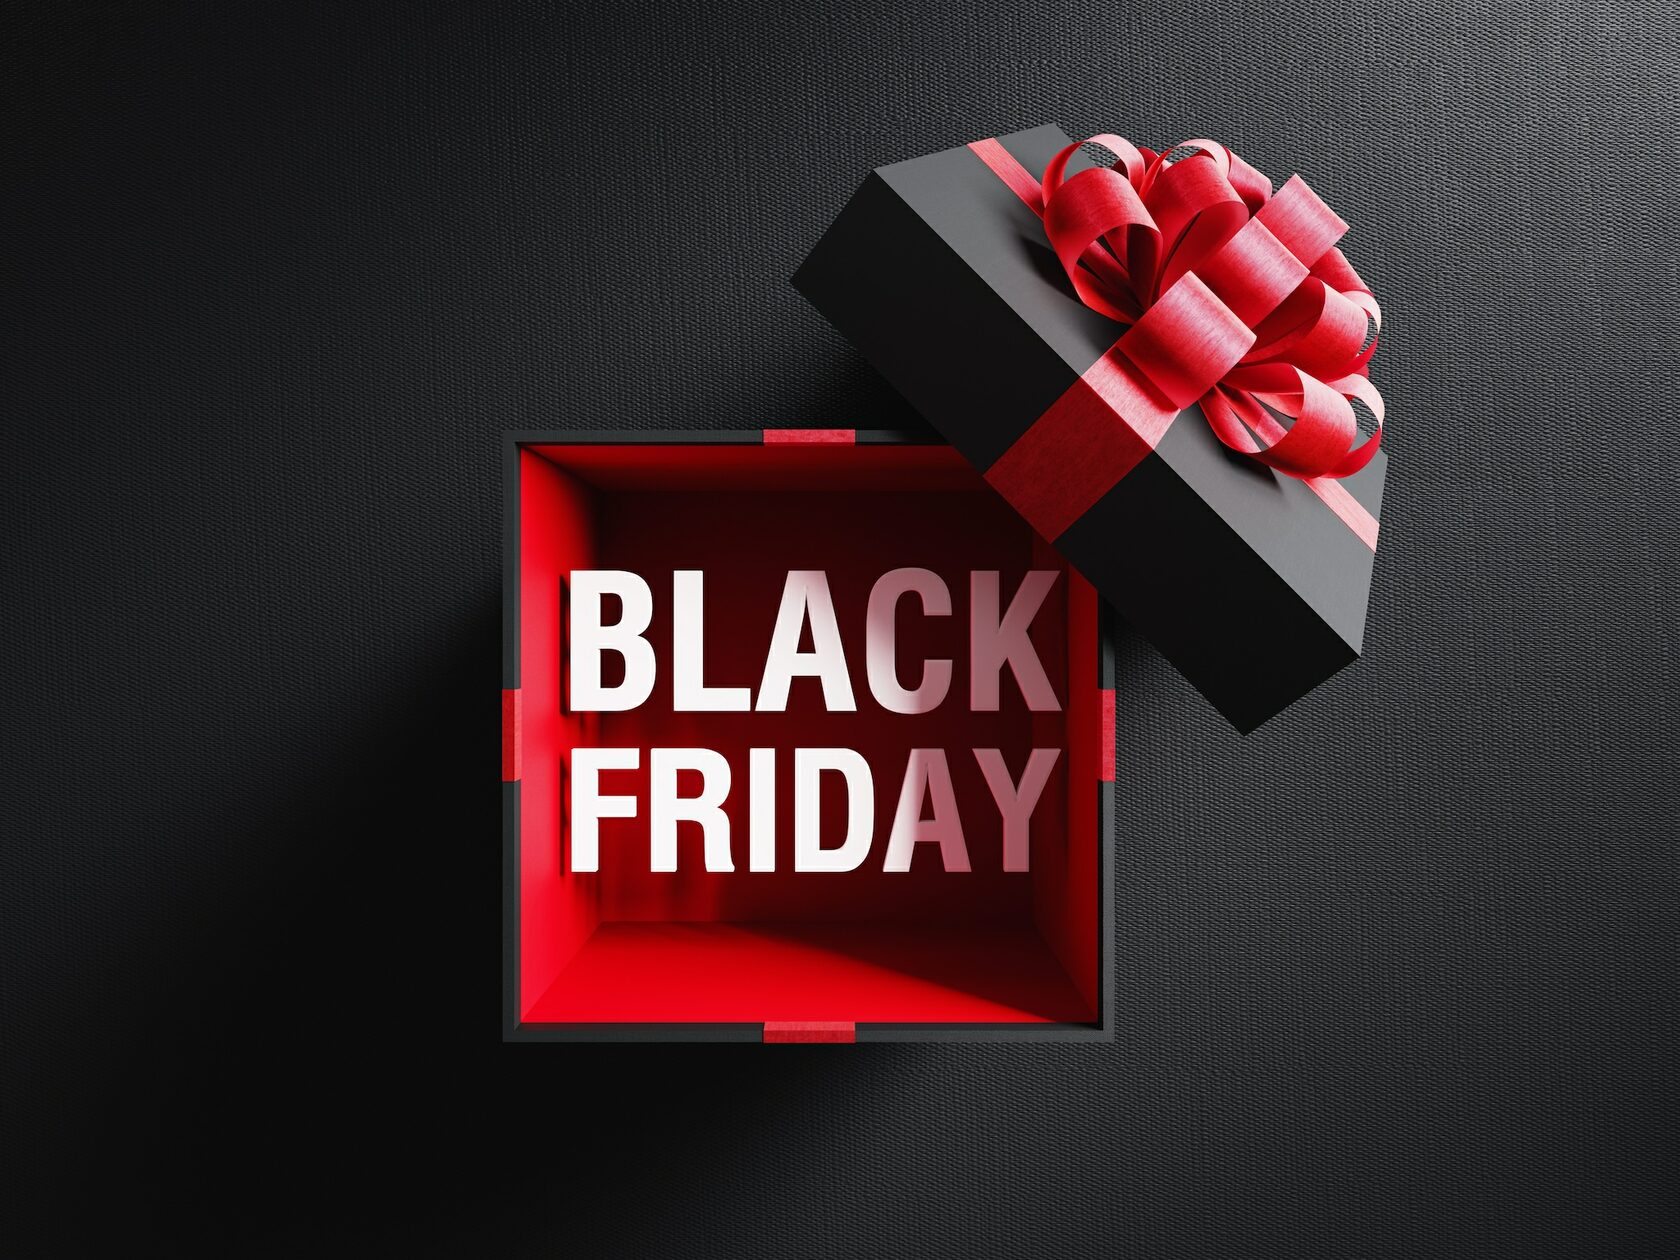 Black Friday unleashes massive discounts on Top VPNs: grab the cybersecurity bargains now!